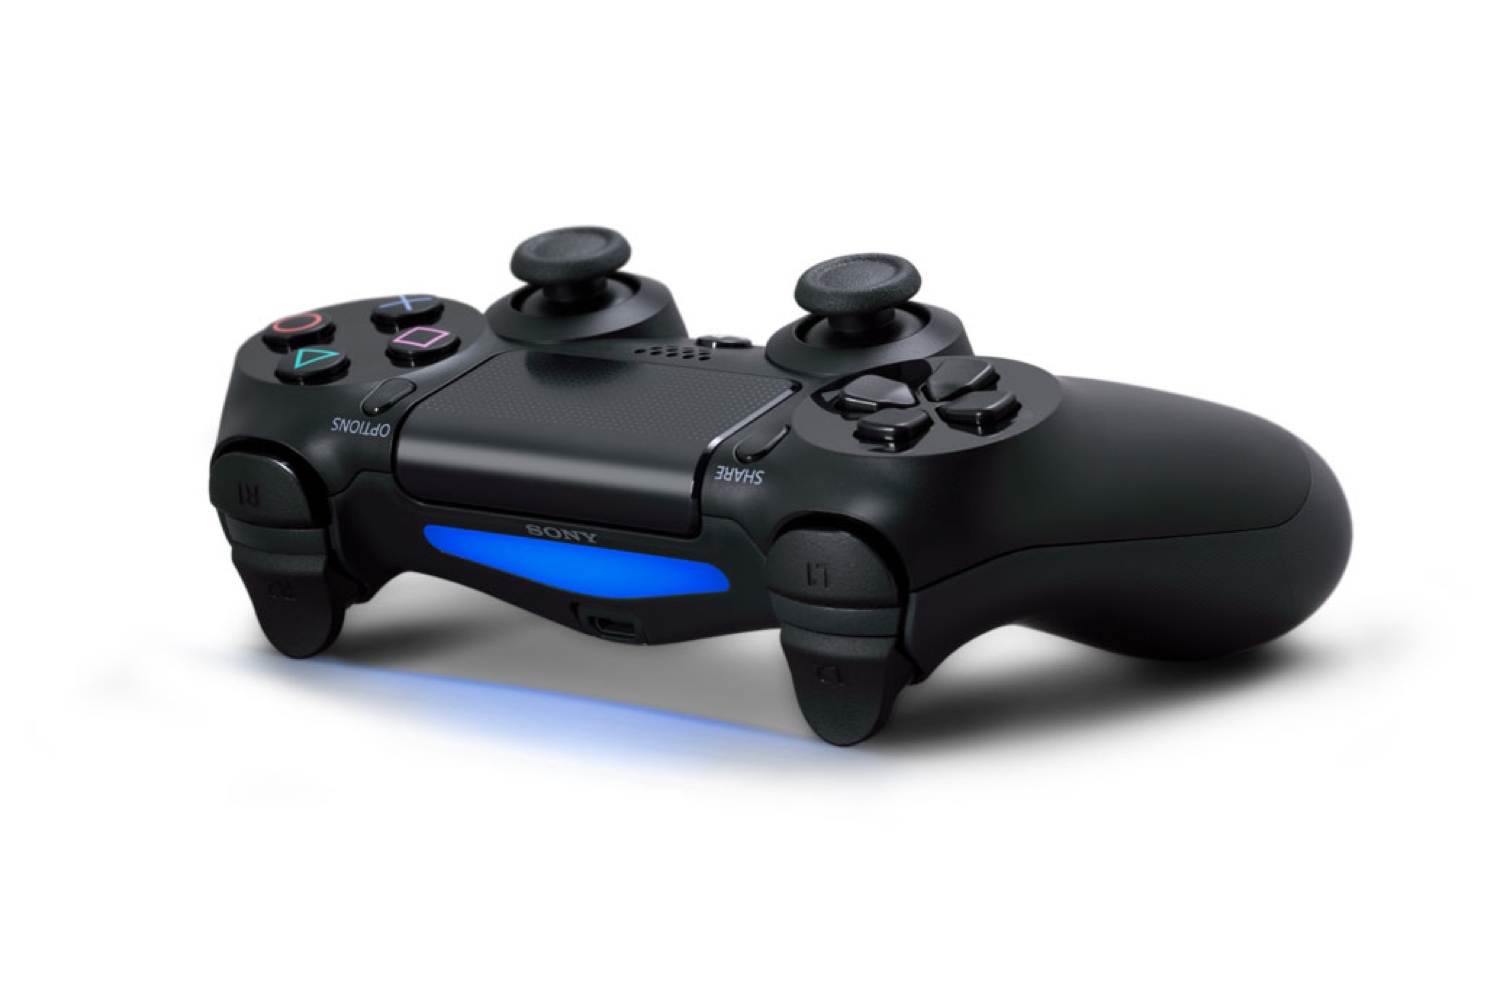 The PS4 DualShock 4 GamePad Is Now Bluetooth Compatible with the PS3 | Time